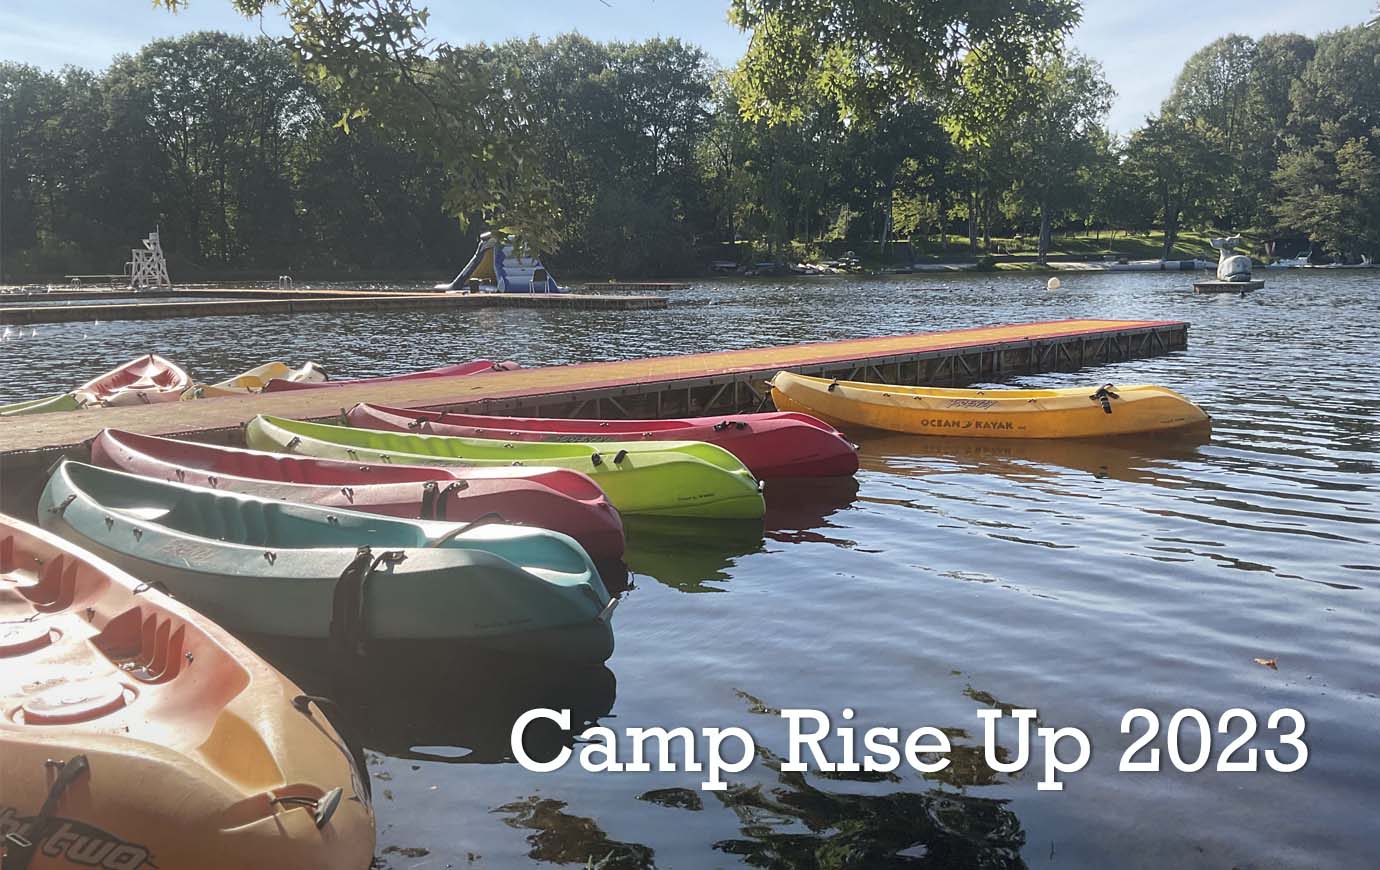 Camp Rise Up 2023, showing canoes at the lake